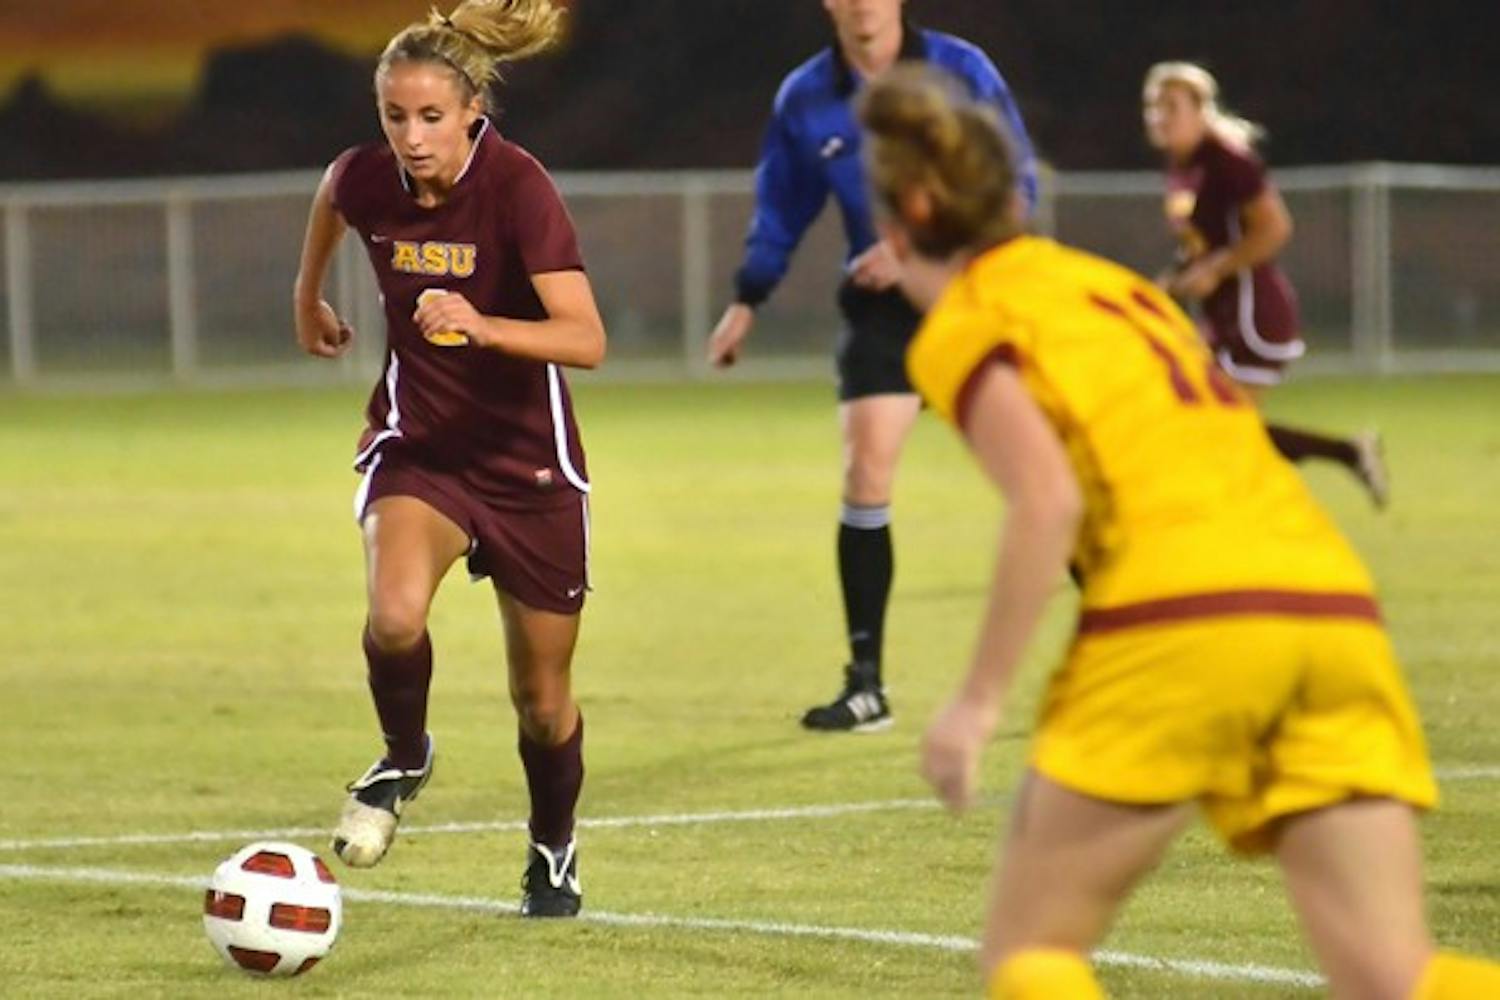 POSTSEASON POISE:Redshirt senior midfielder Lindsey Johns takes the ball up field against USC last Friday. The Sun Devils upset the Women of Troy to earn an NCAA Tournament bid and play UC Irvine on Friday in Califronia. (Photo by Aaron Lavinsky)